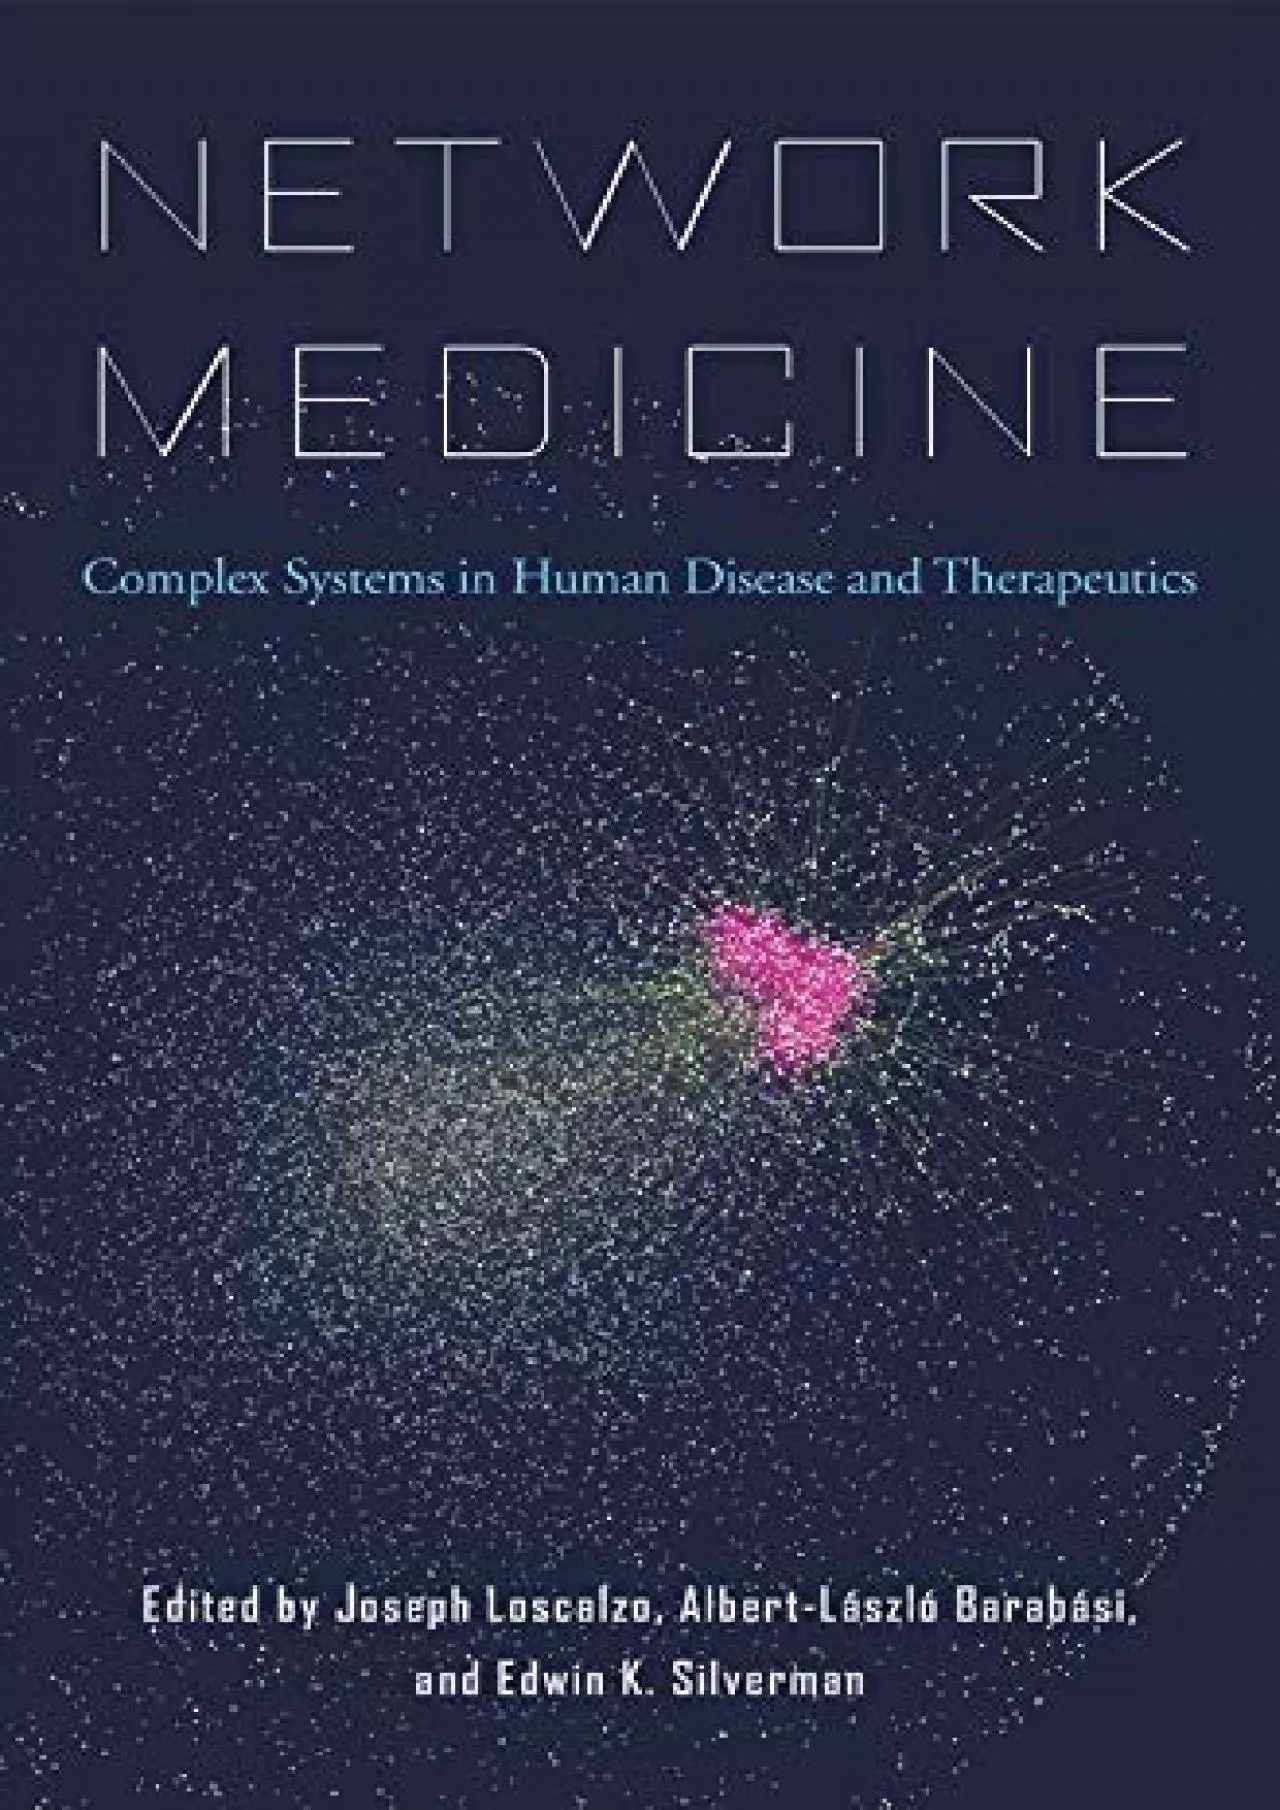 (EBOOK)-Network Medicine: Complex Systems in Human Disease and Therapeutics